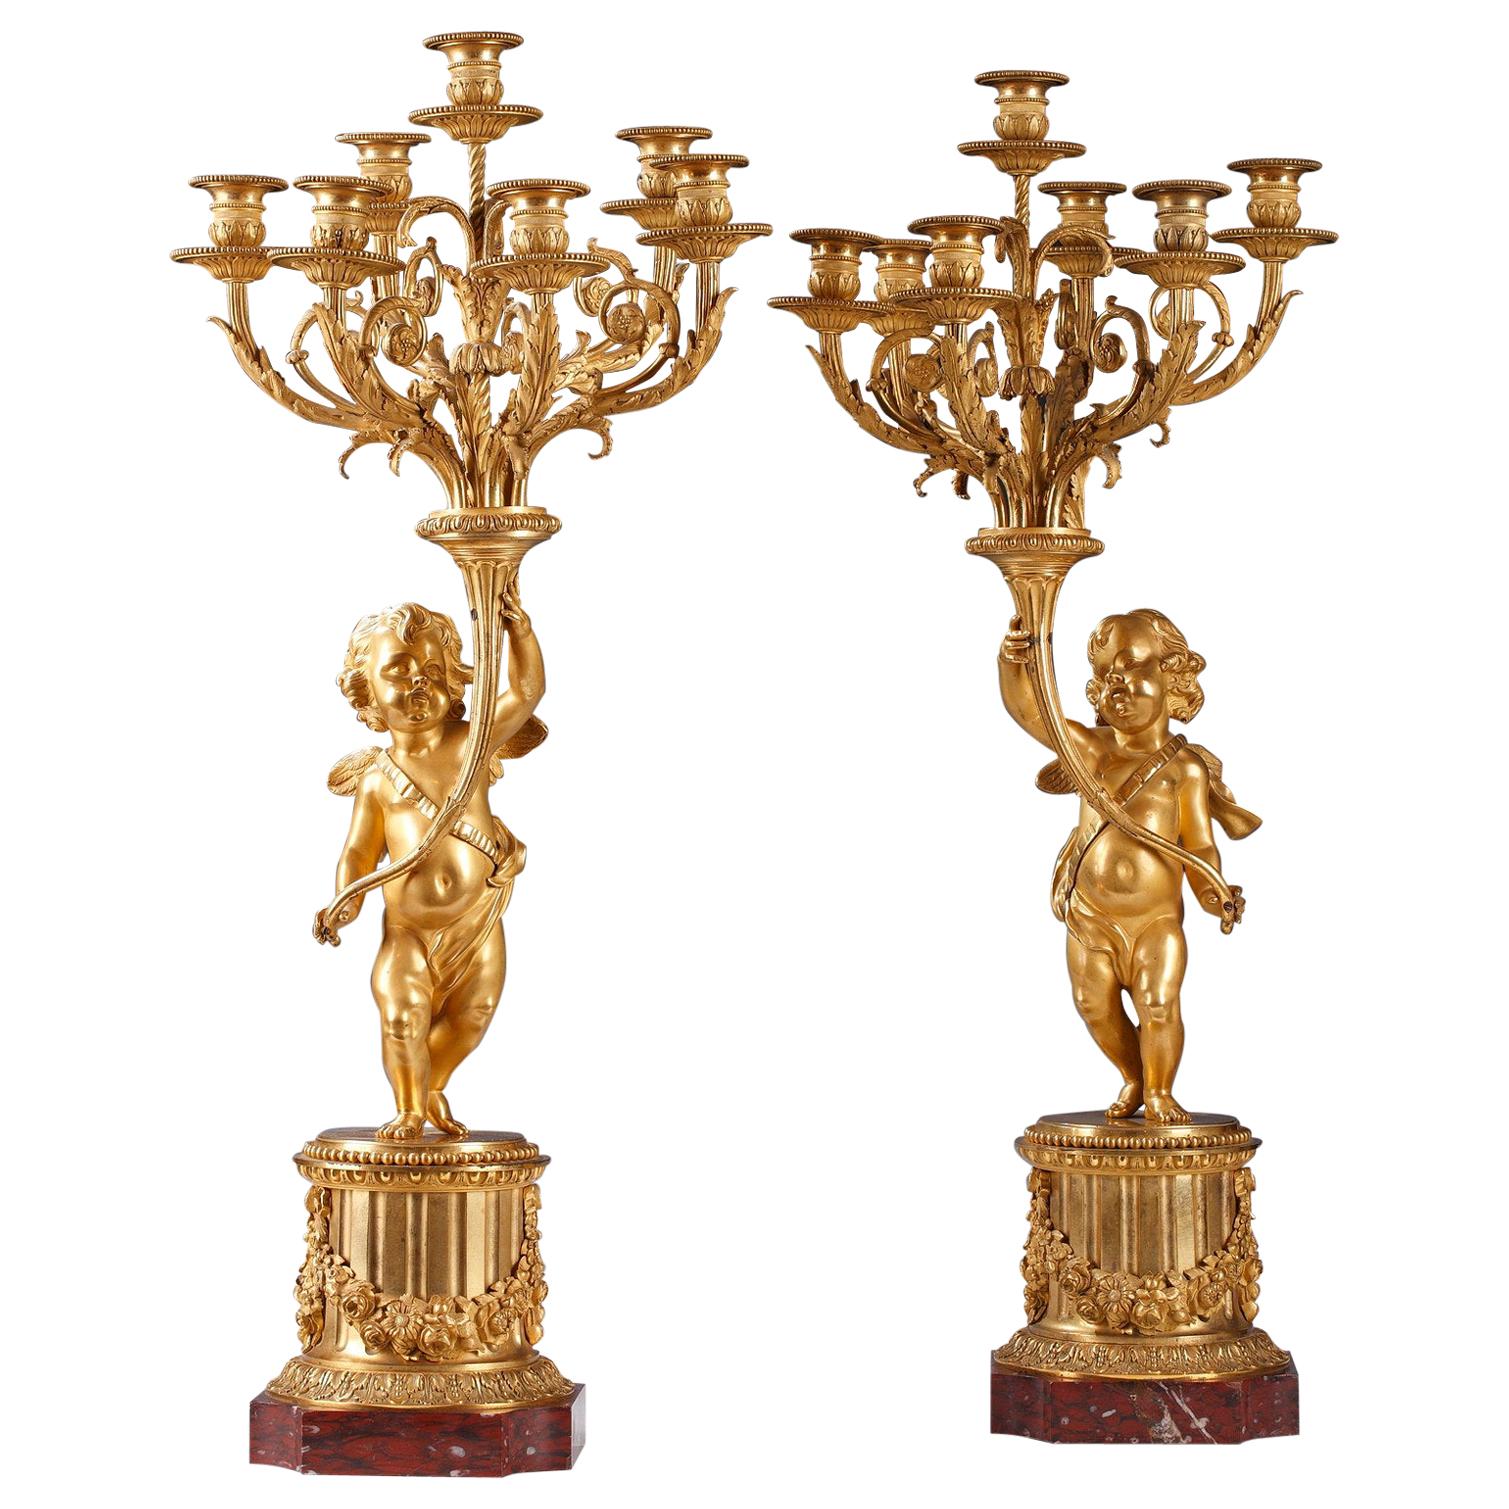 Pair of Gilded Bronze Cherub Candelabras After Clodion, France, Circa 1880 